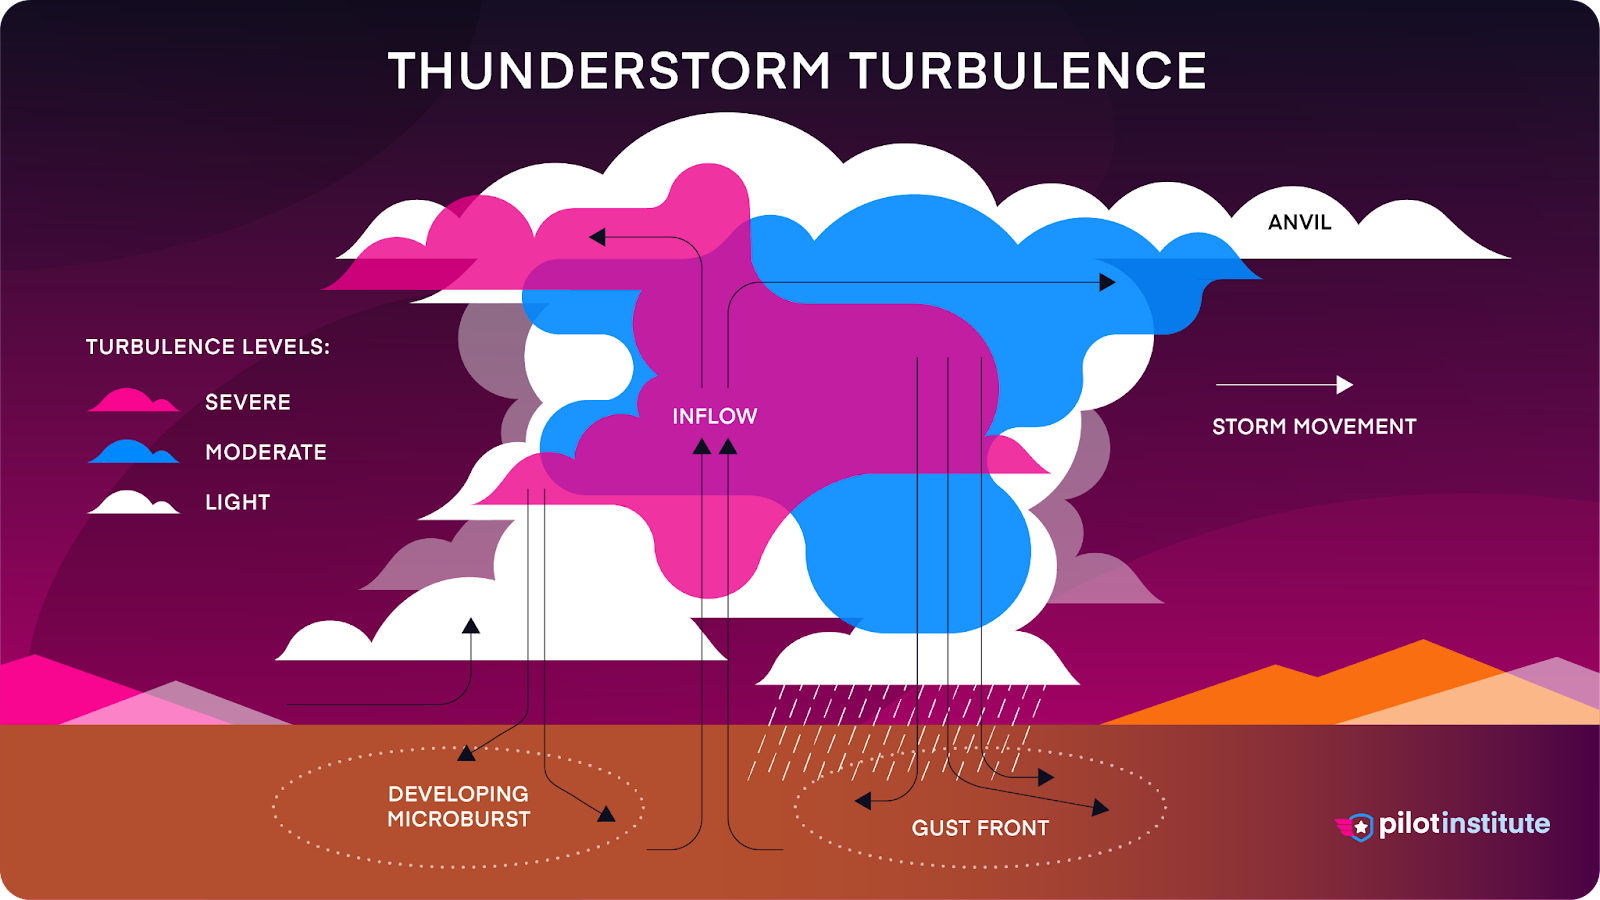 A diagram showing thunderstorm turbulence.